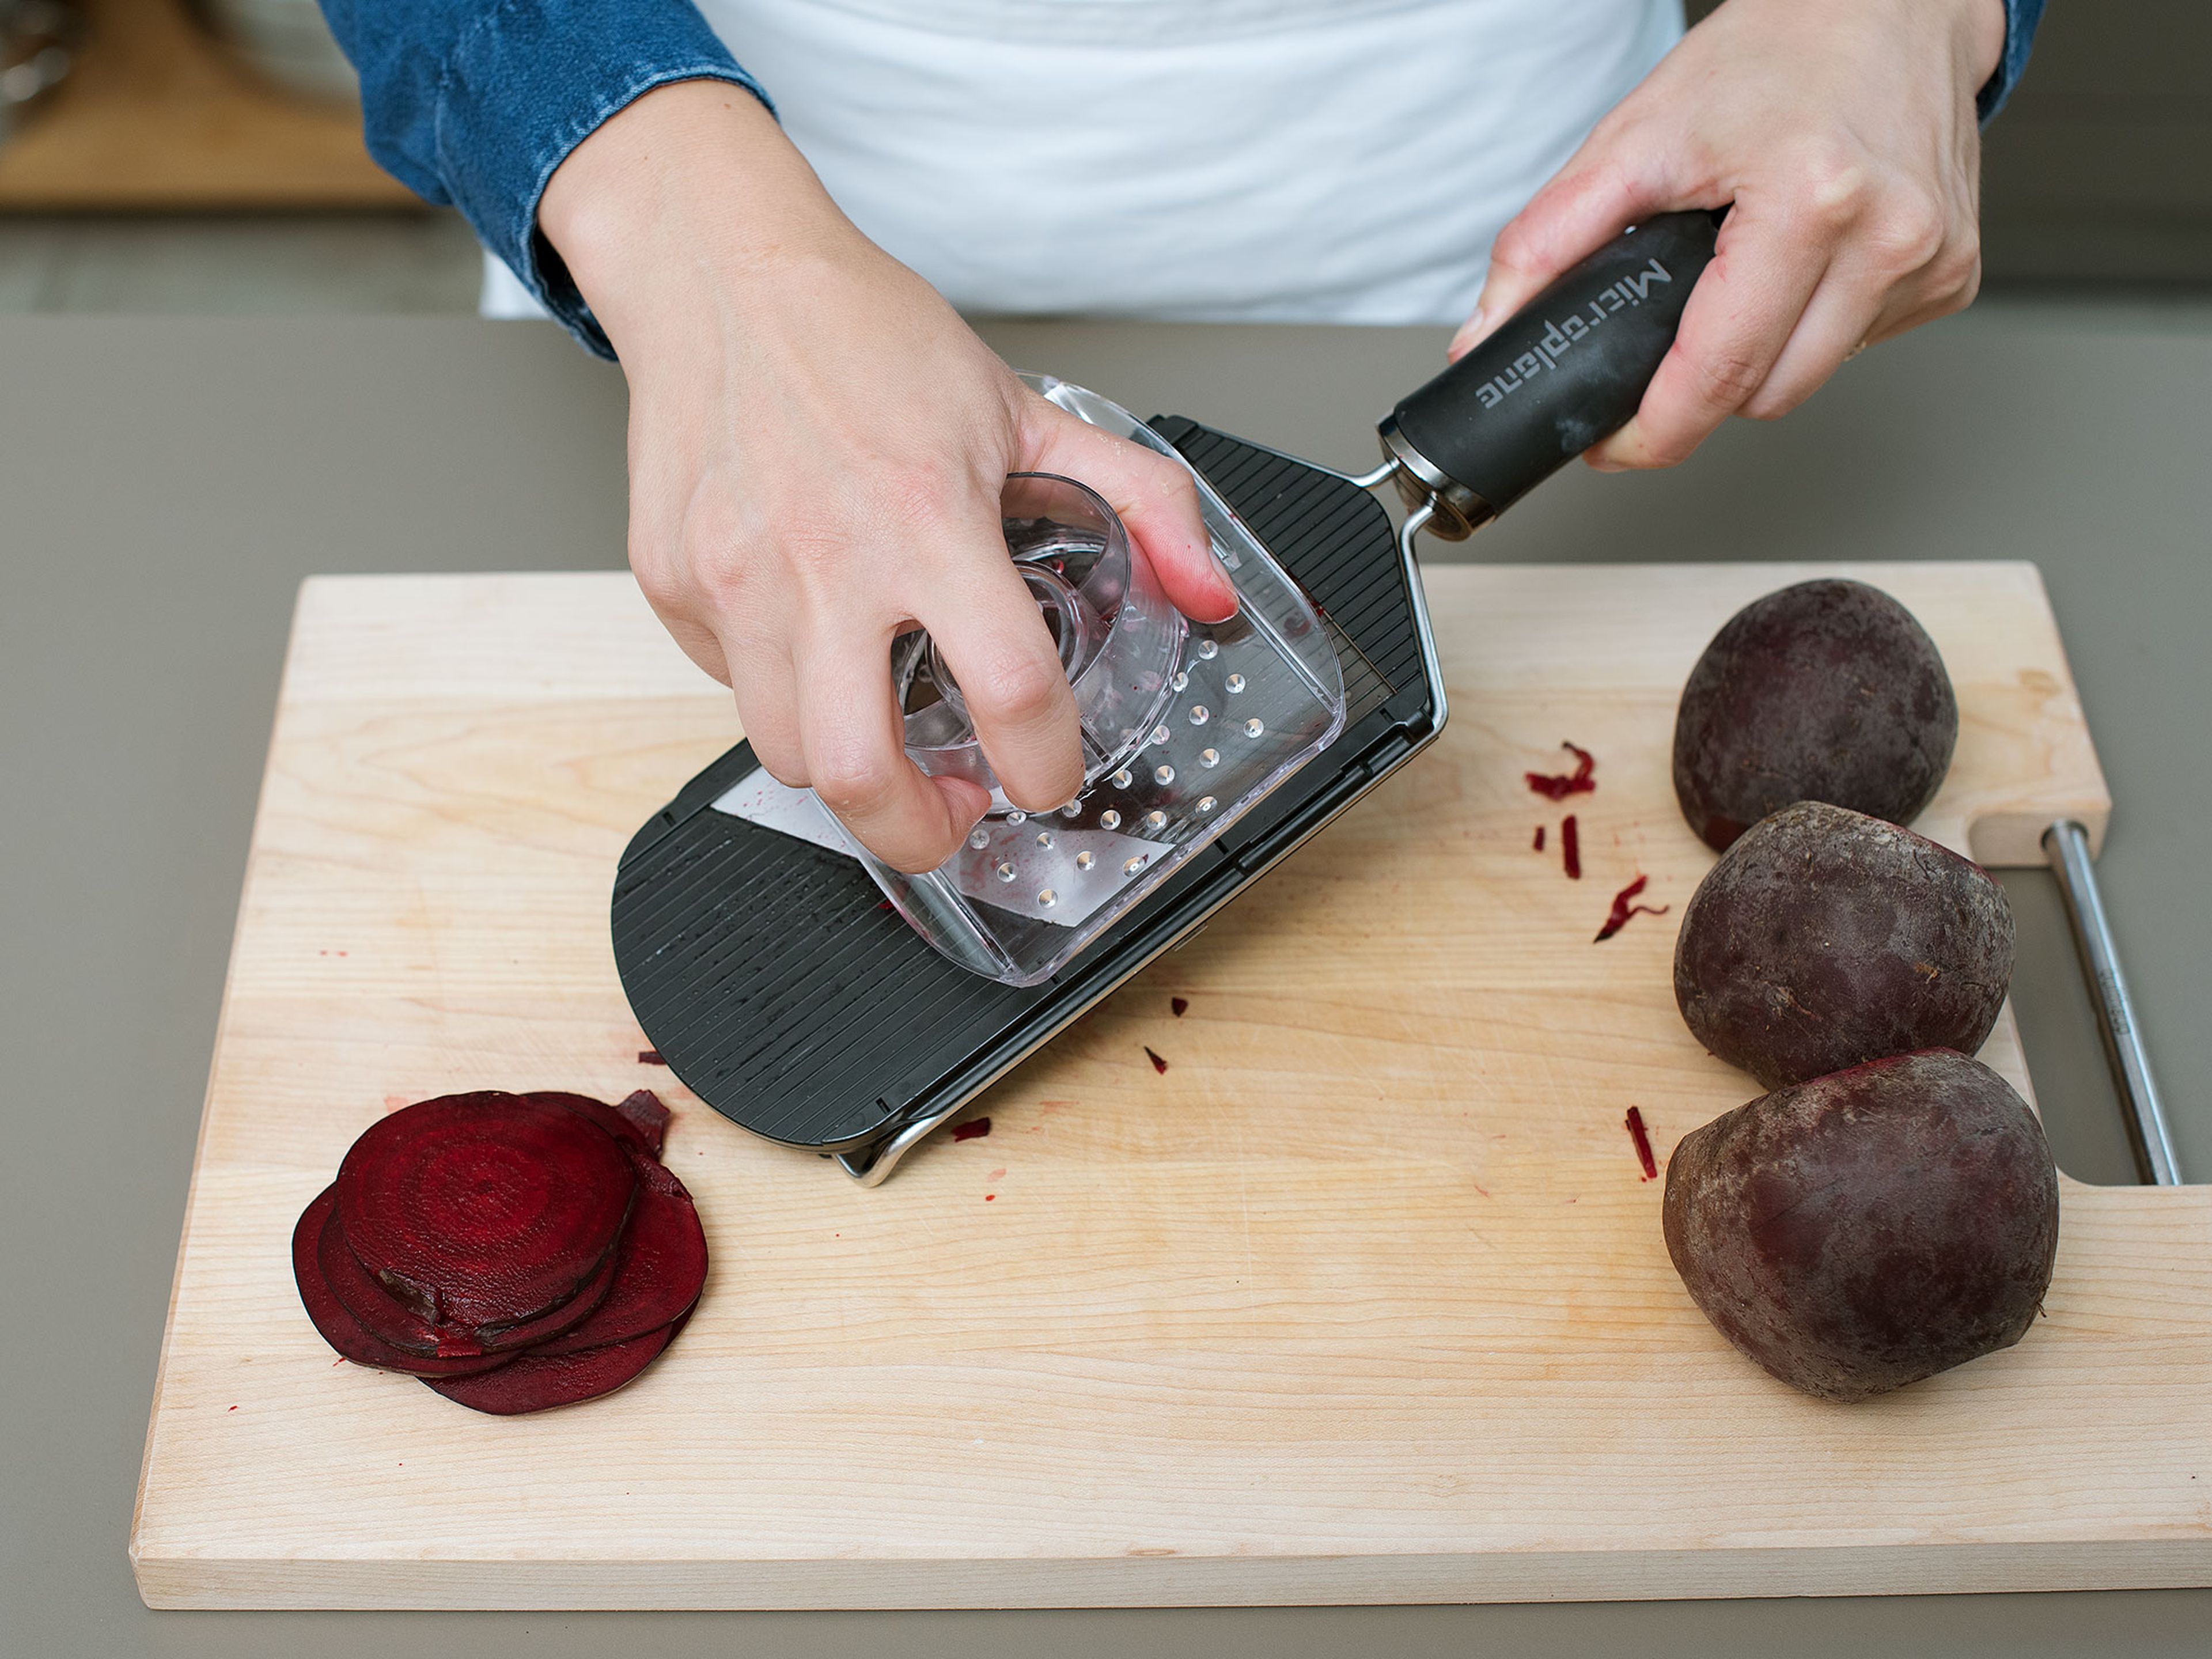 Wash beets, pat dry, and cut off the ends. Slice very thinly with a mandolin.